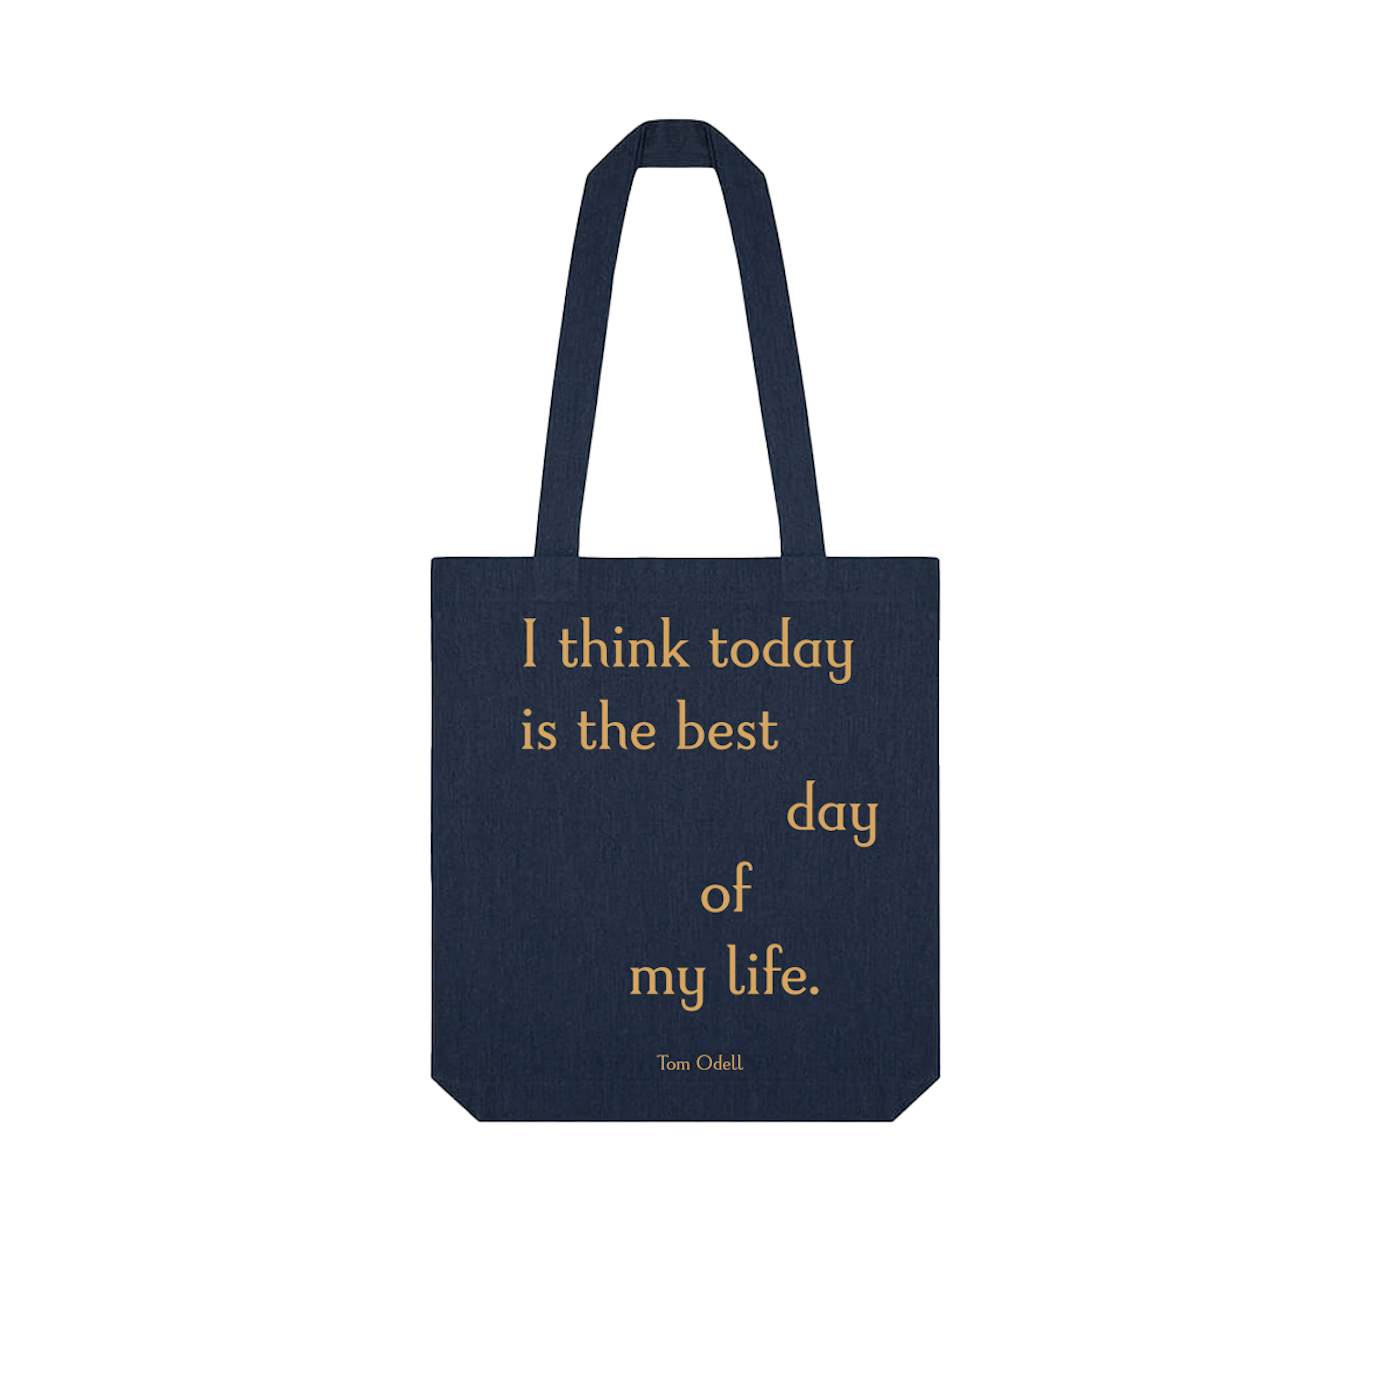 Tom Odell Best Day Of My Life tote bag